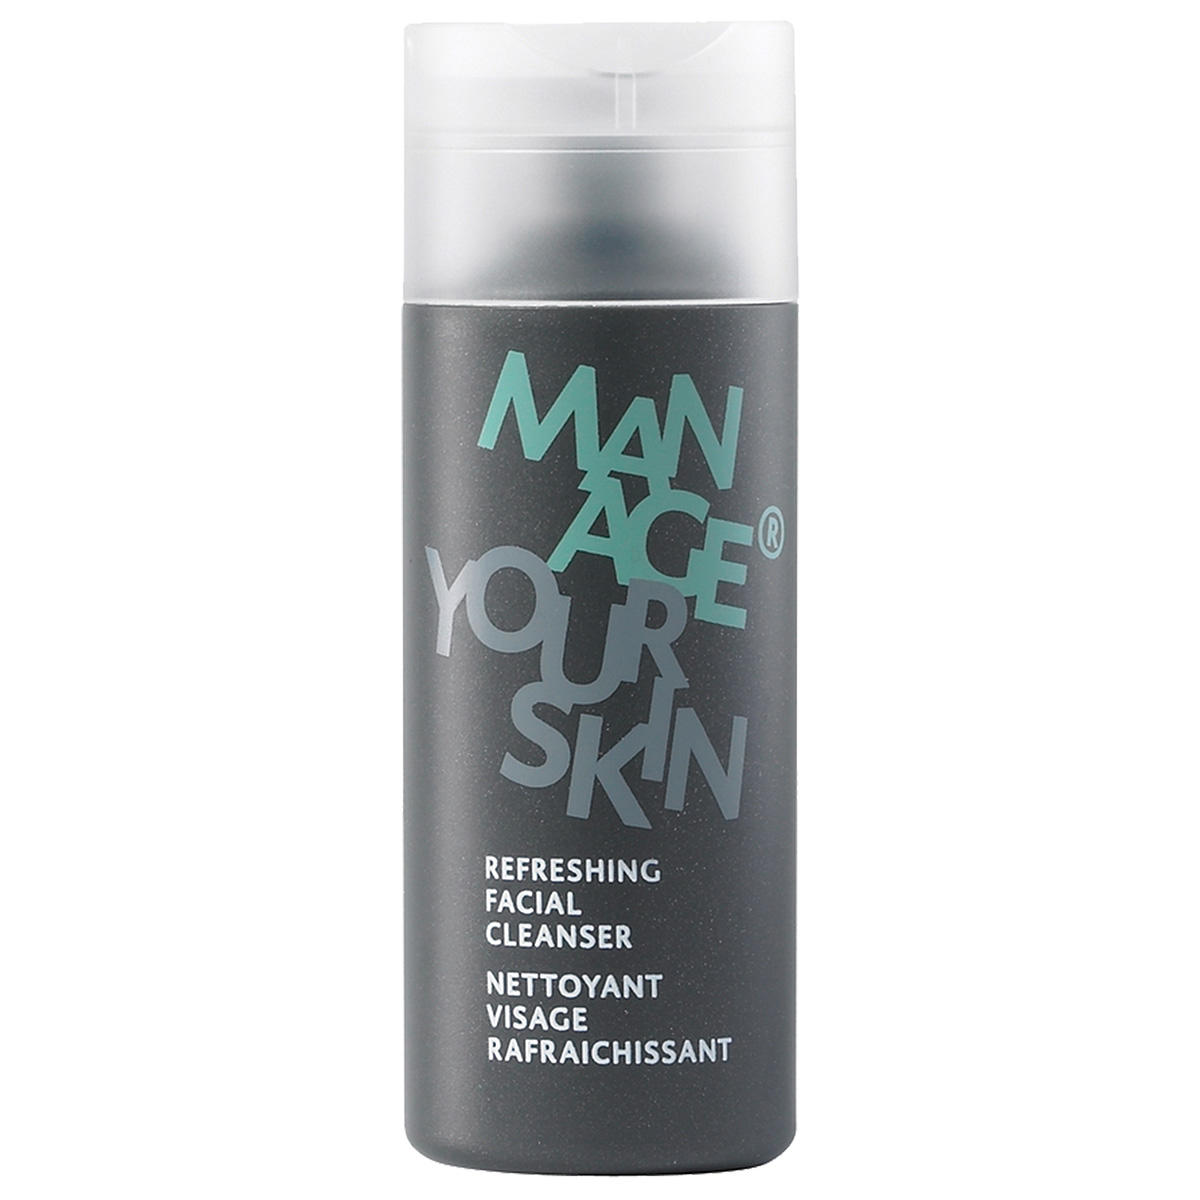 Manage Your Skin REFRESHING FACIAL CLEANSER 150 ml - 1